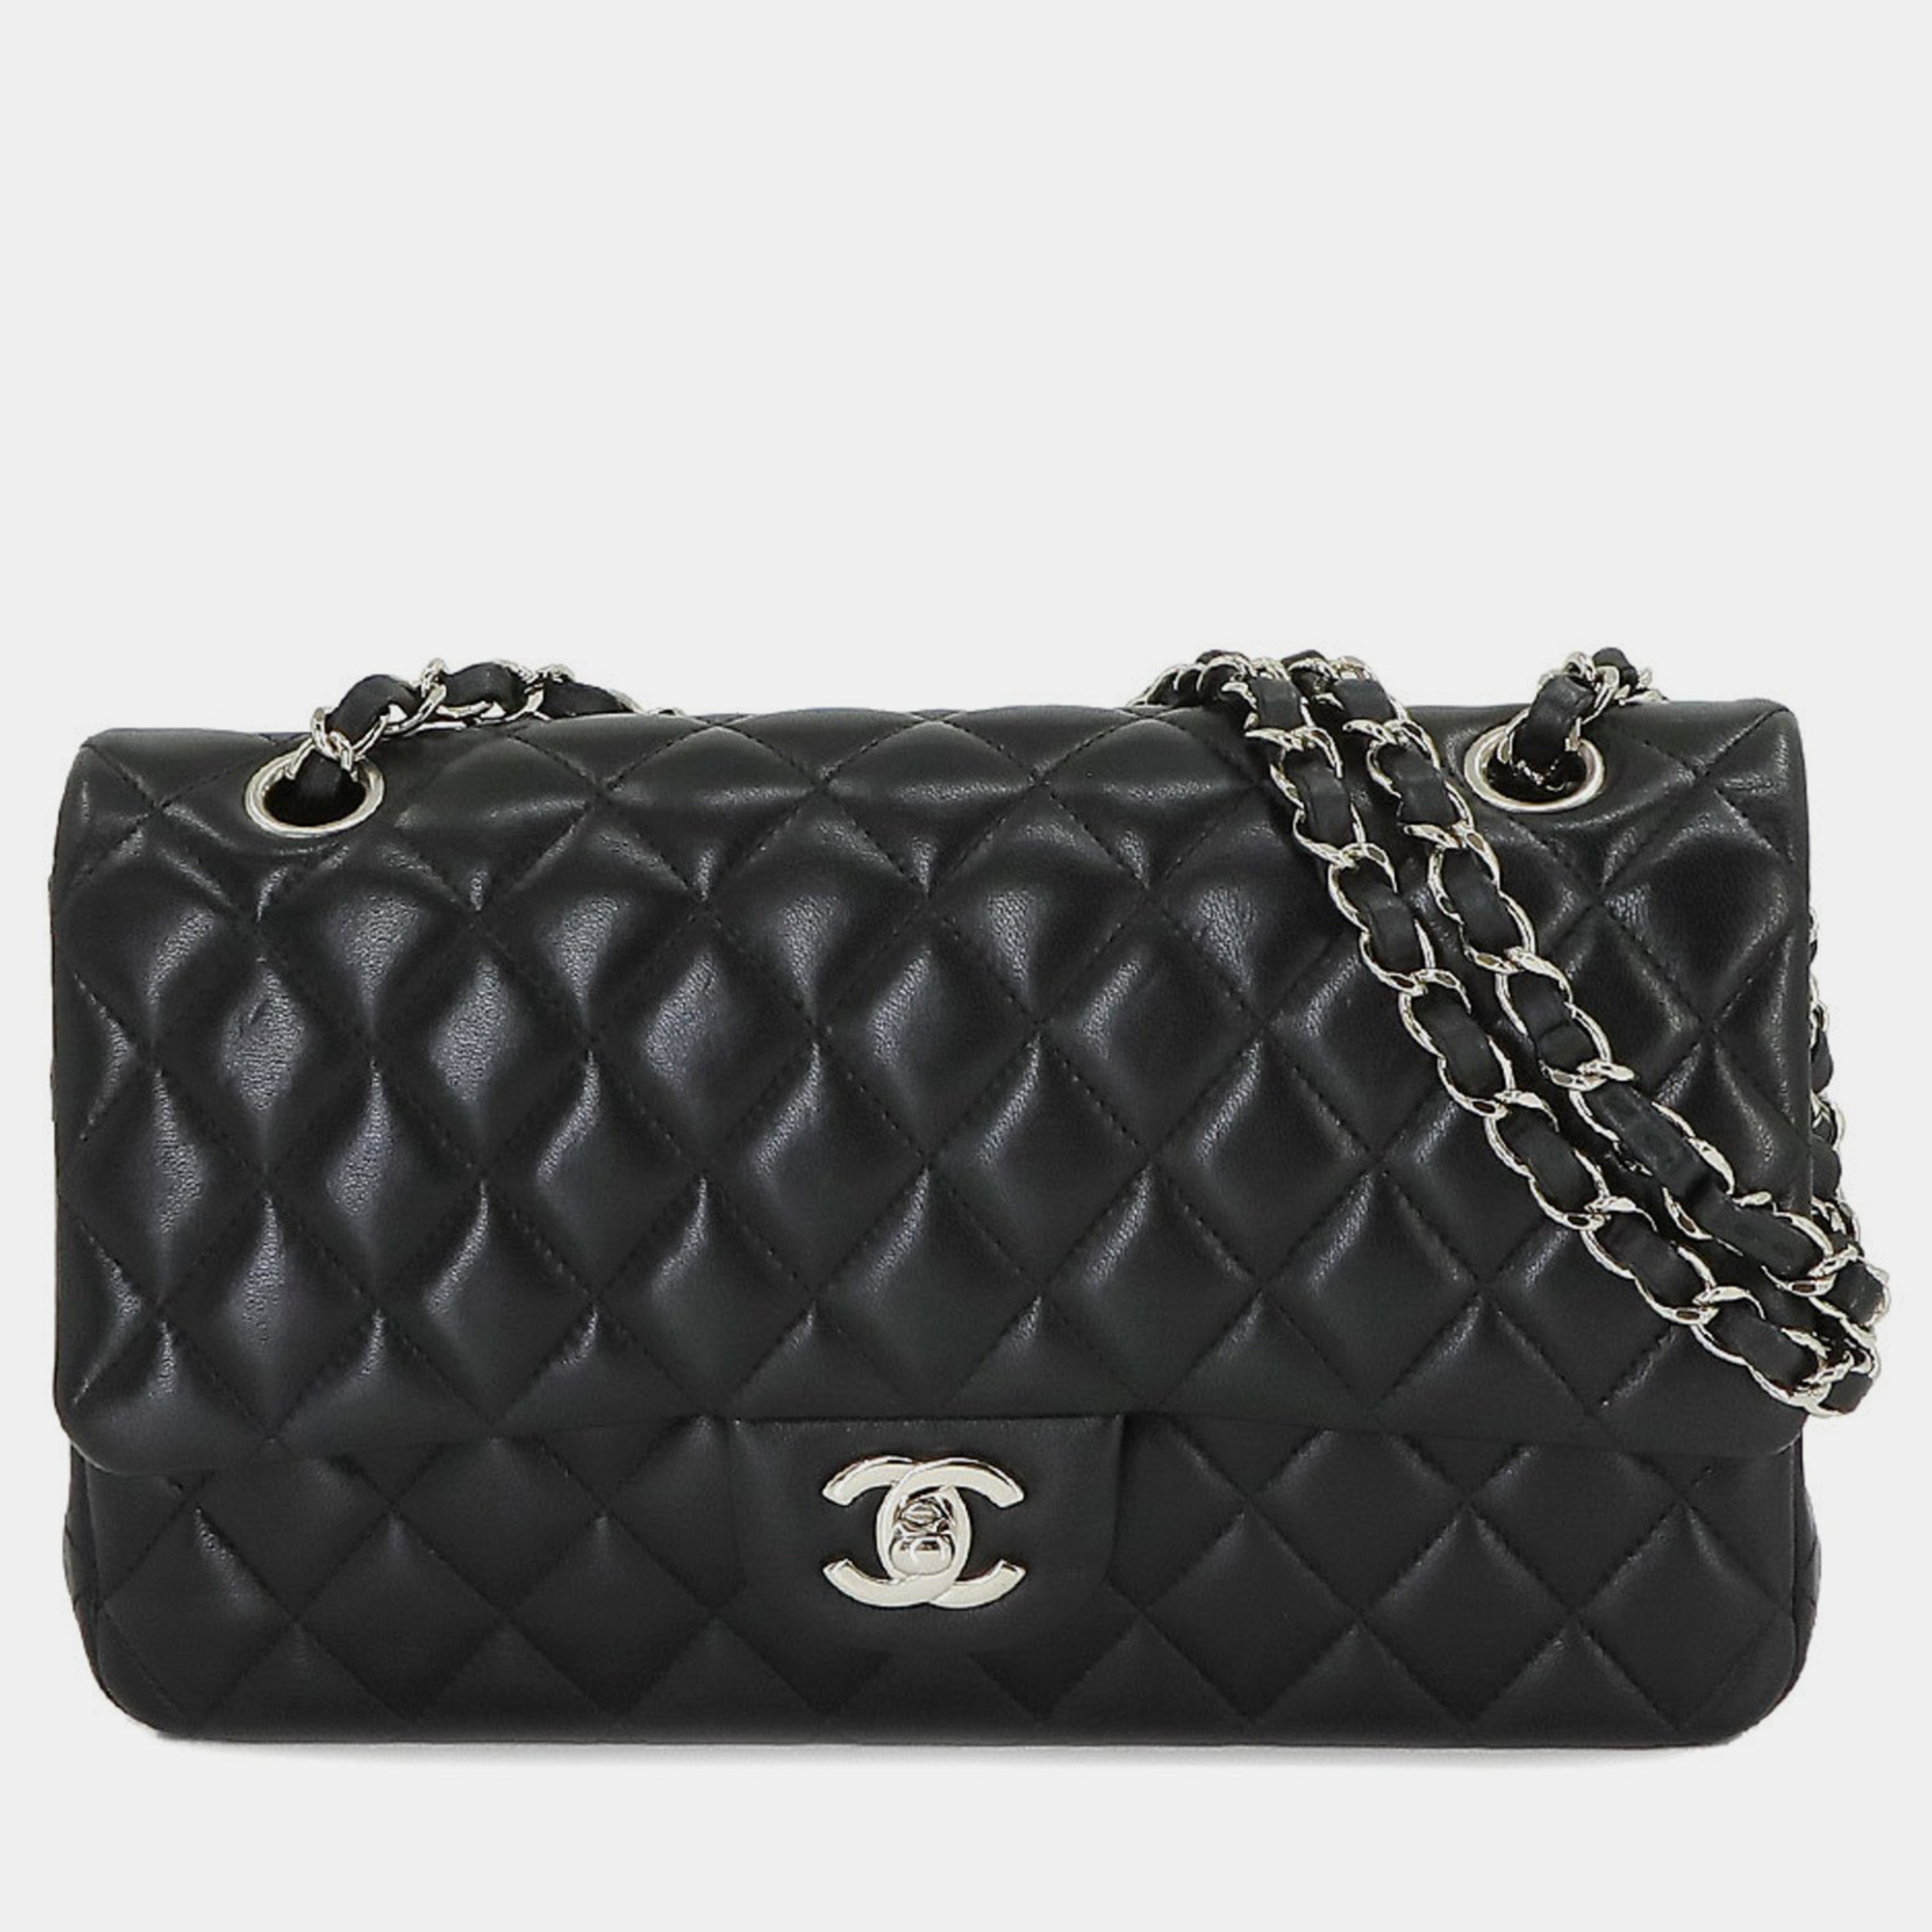 This Chanel elegant shoulder bag is perfect to enhance your everyday style. It is carefully sewn and finished to be a wonderful investment in your closet.